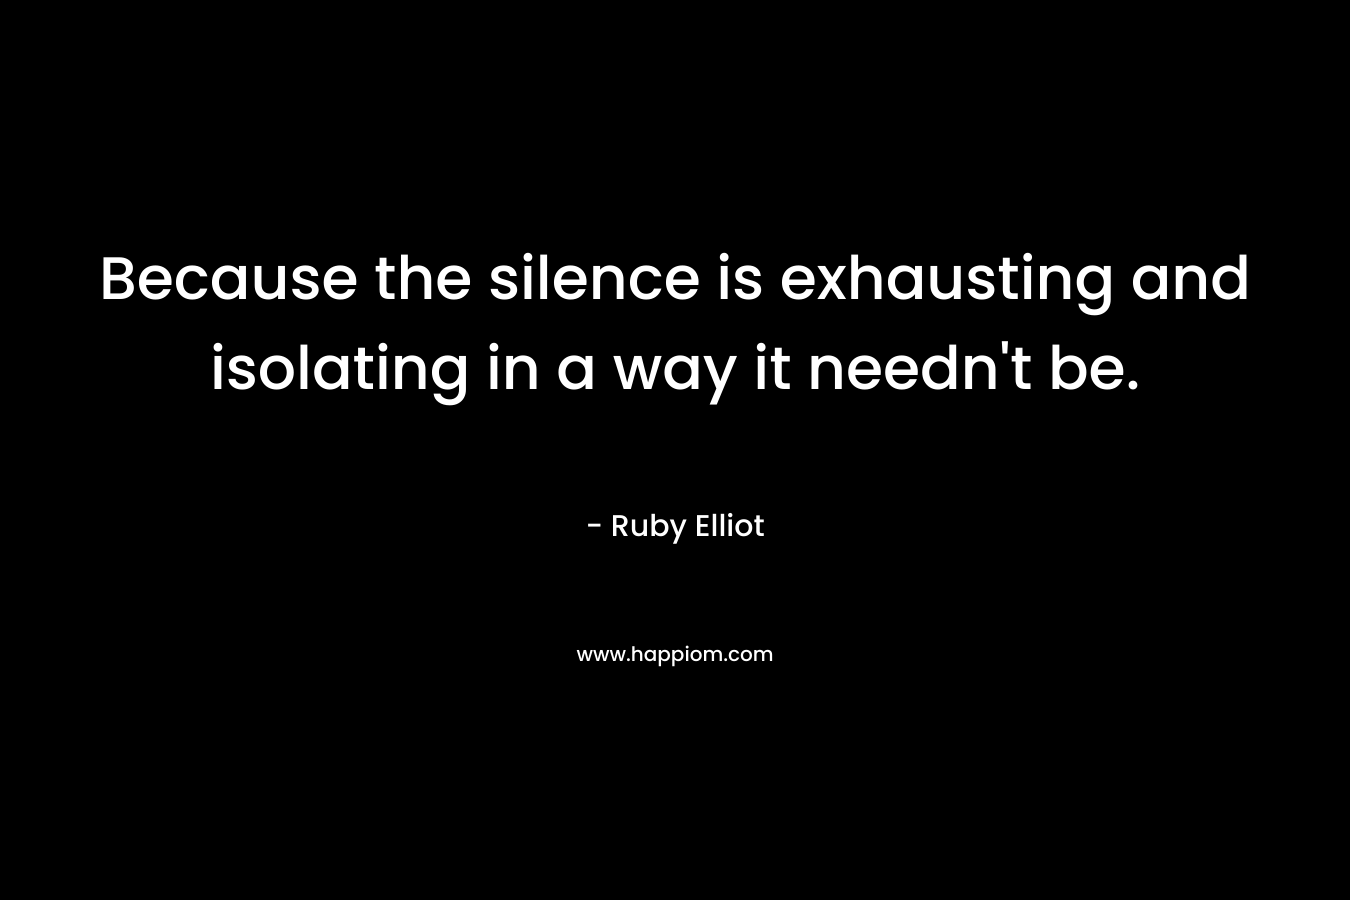 Because the silence is exhausting and isolating in a way it needn't be.